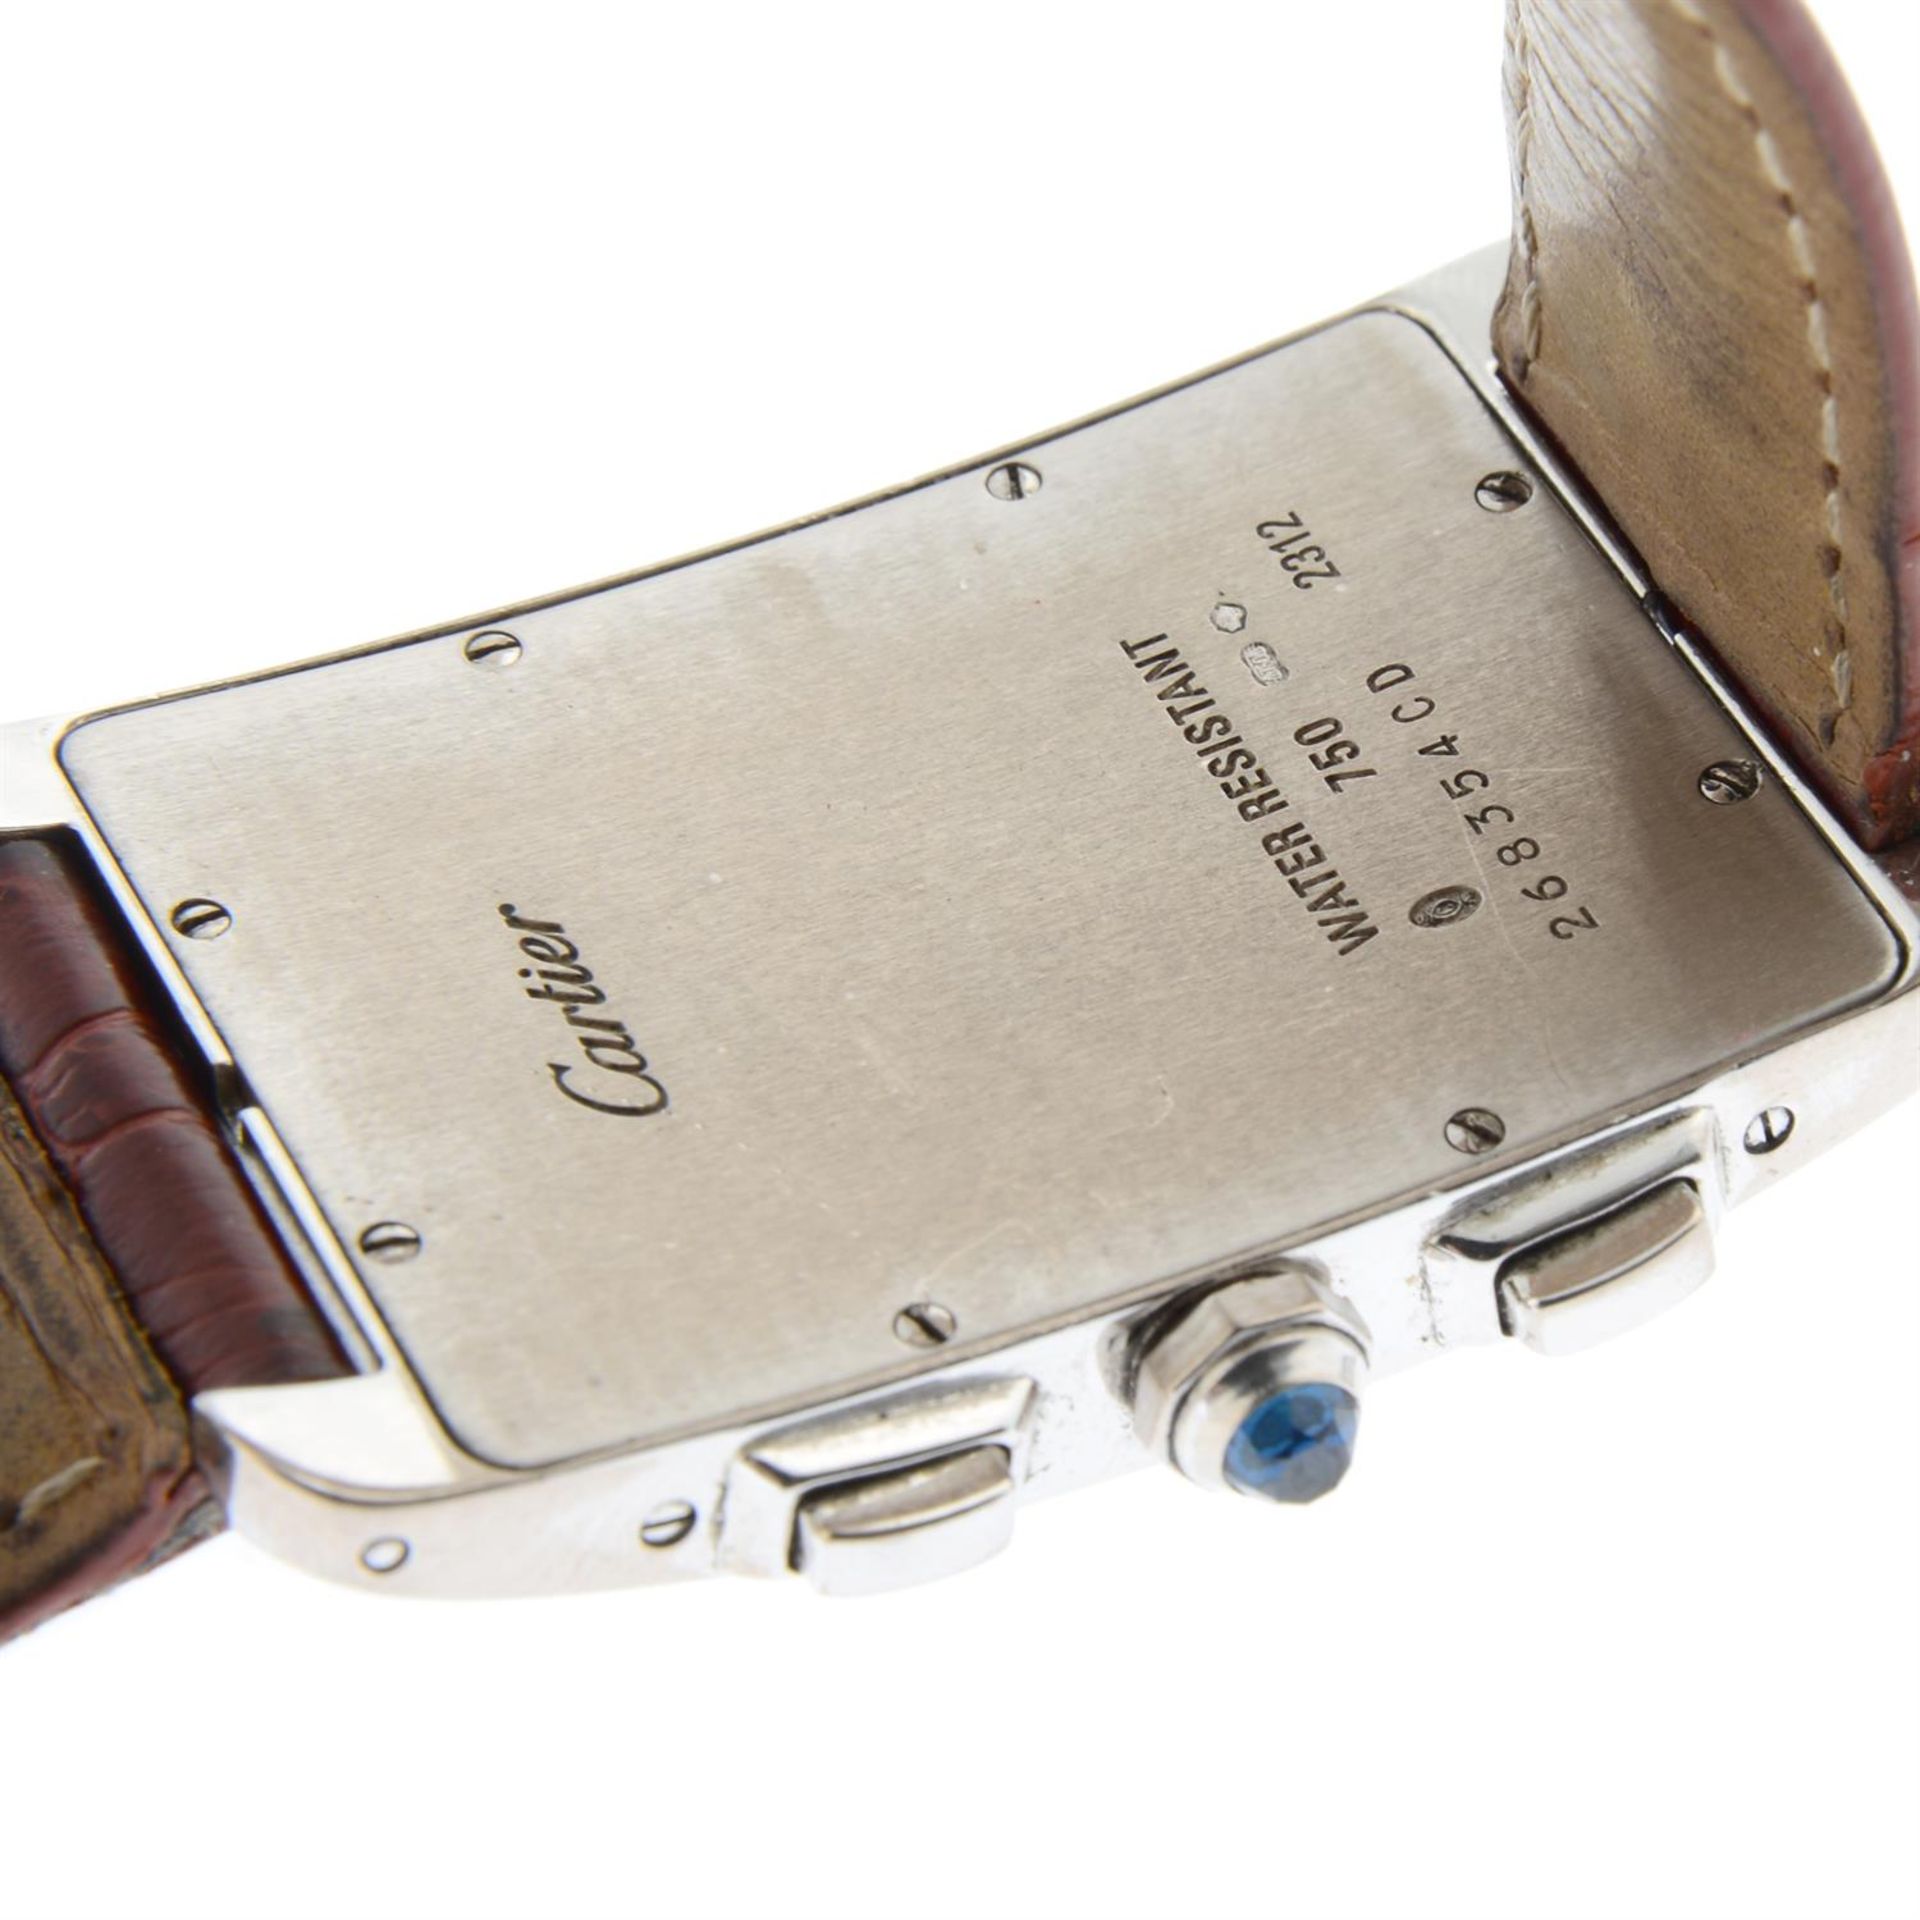 CARTIER - an 18ct white gold Tank Americaine chronograph wrist watch, 26mm. - Image 2 of 6